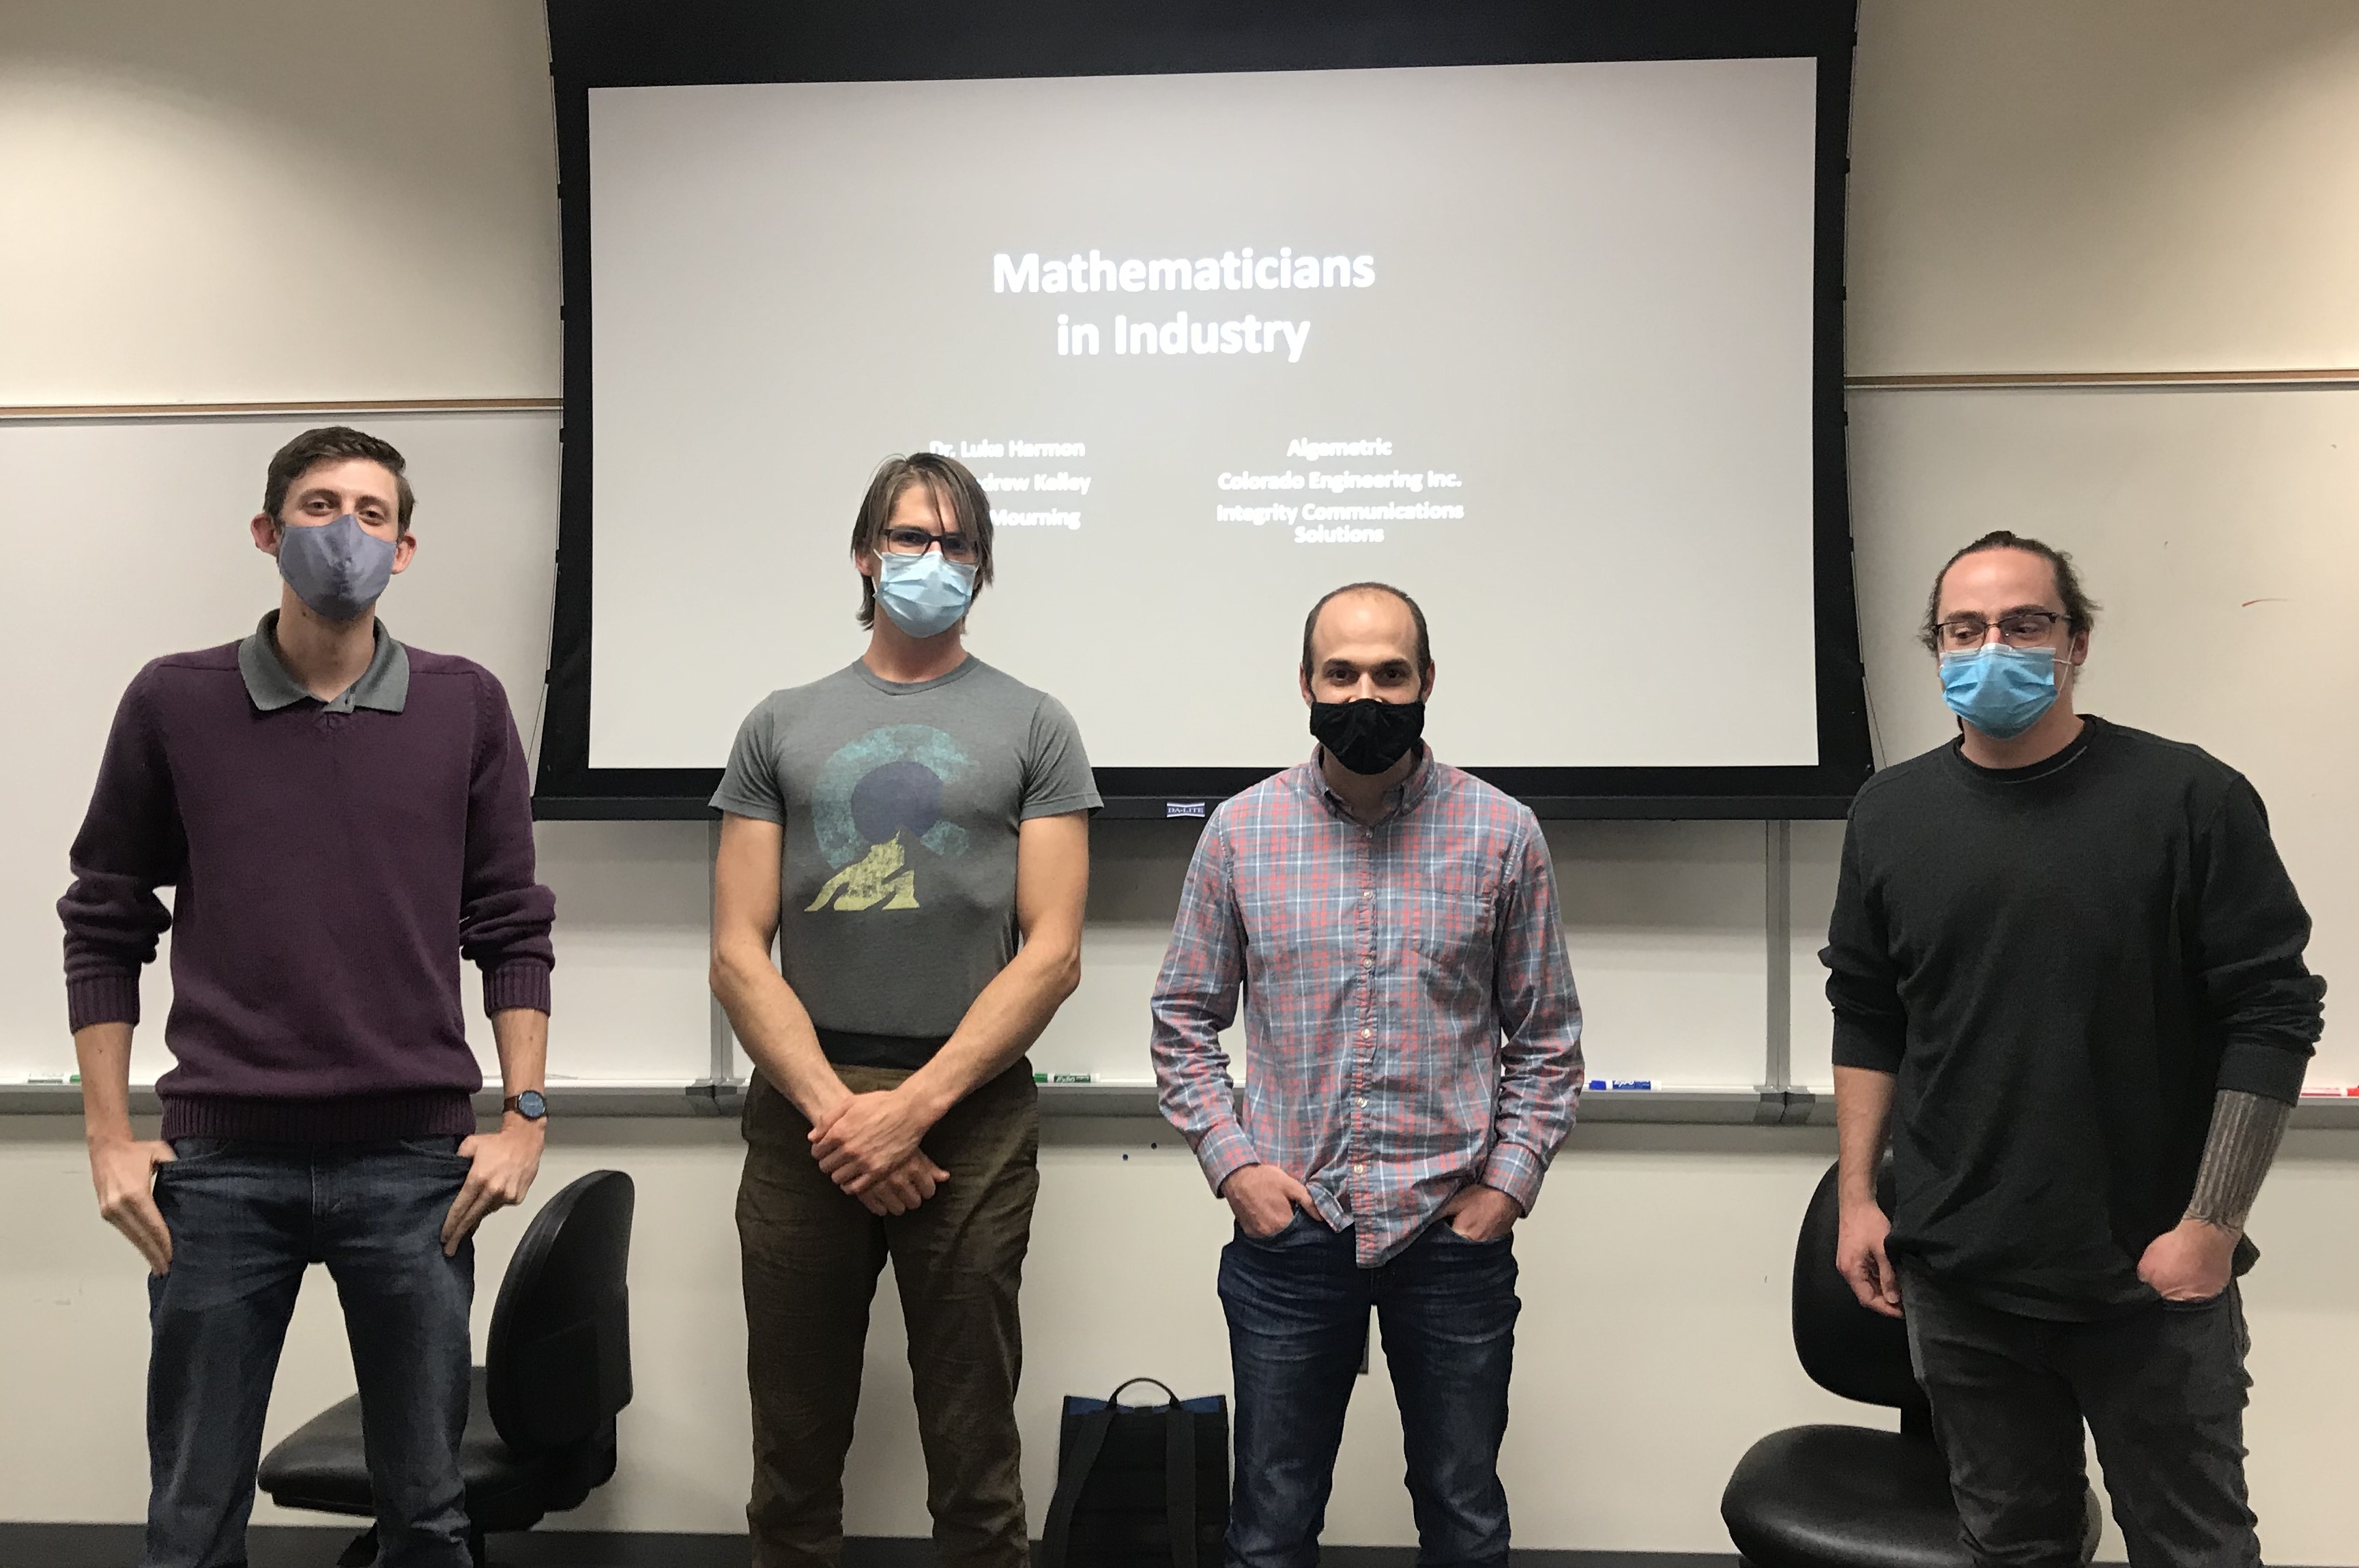 Four graduate students standing in front of a projection screen